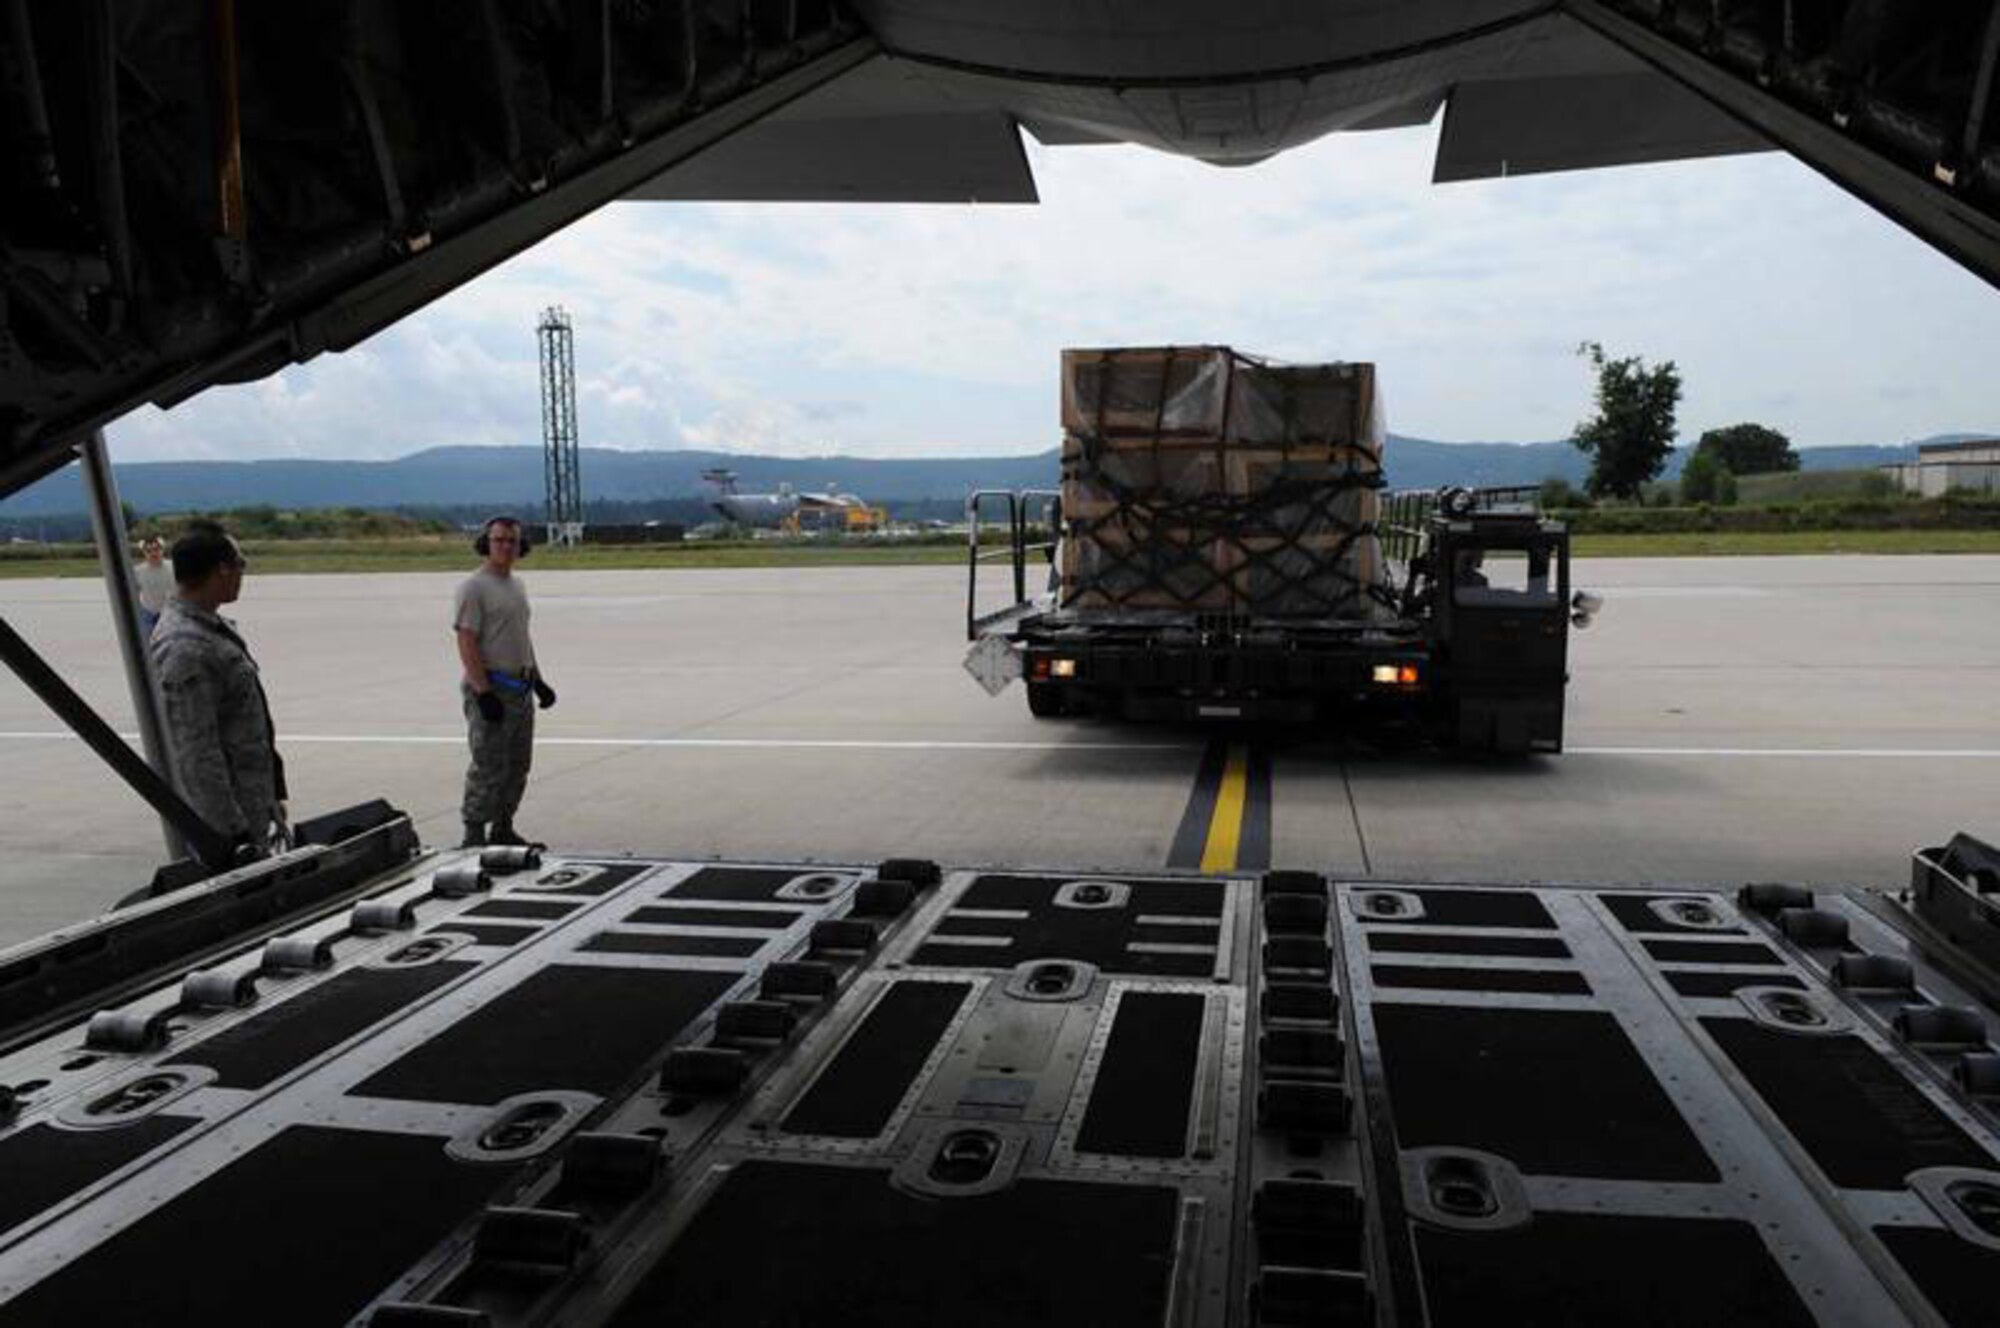 RAMSTEIN AIR BASE, Germany -- Air Force personnel load firefighting equipment onto a C-130J, bound for Russia, at Ramstein Air Base Aug. 13, 2010. The equipment is part of a joint U.S. Air Forces Europe, U.S. Naval Forces Europe/Africa, Marine Forces Europe and U.S. Army Europe effort to assist the Russian government in fighting the wildfires in the country. (U.S. Army photo by Staff Sgt. Lawree Washington)